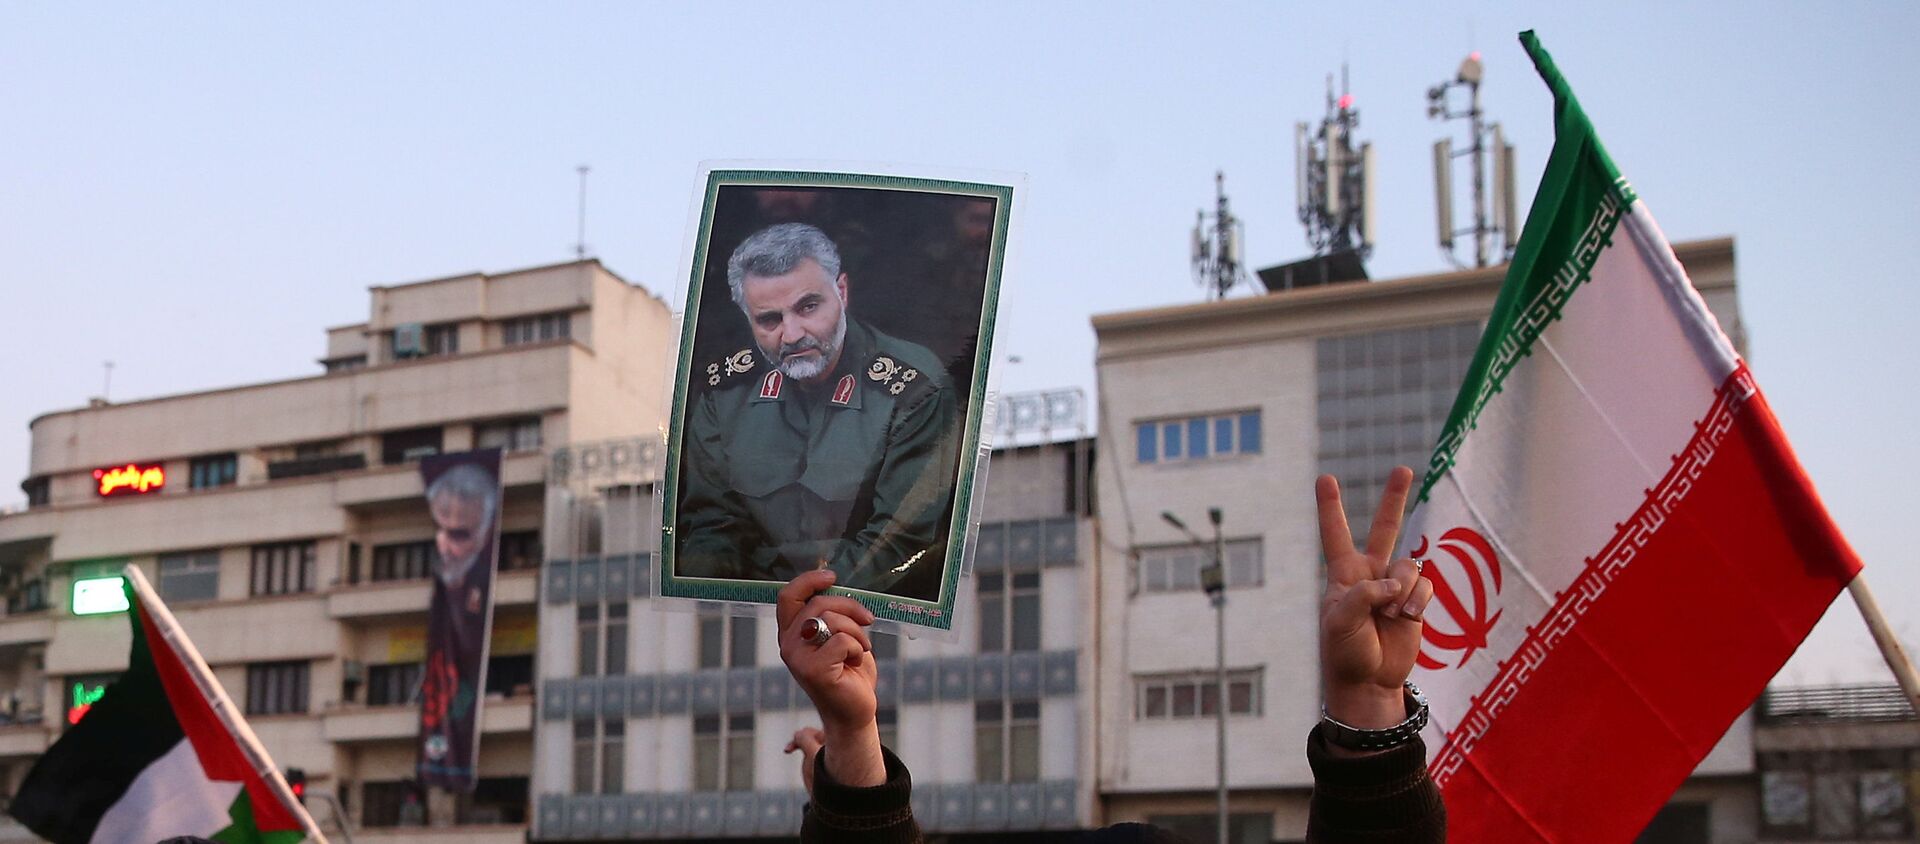 A man holds a picture of late Iranian Major-General Qassem Soleimani, as people celebrate in the street after Iran launched missiles at U.S.-led forces in Iraq, in Tehran, Iran - Sputnik International, 1920, 07.02.2020